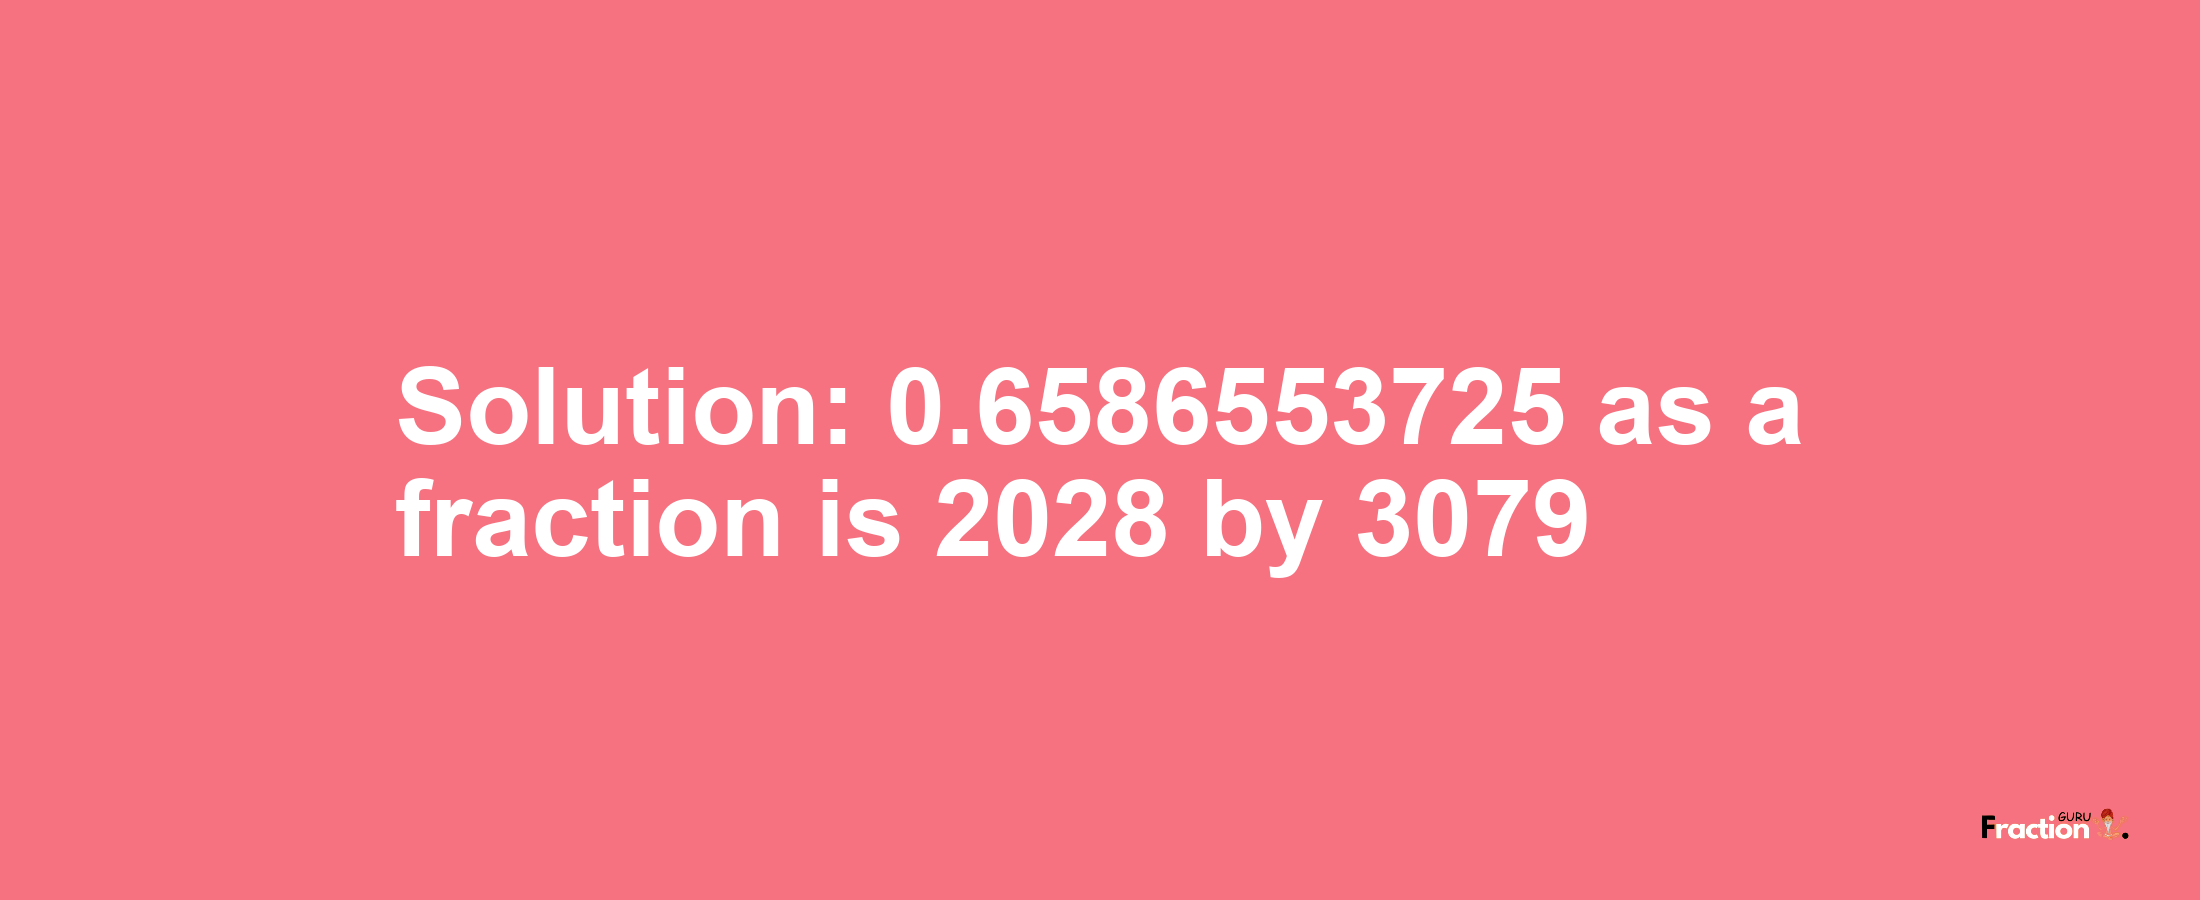 Solution:0.6586553725 as a fraction is 2028/3079